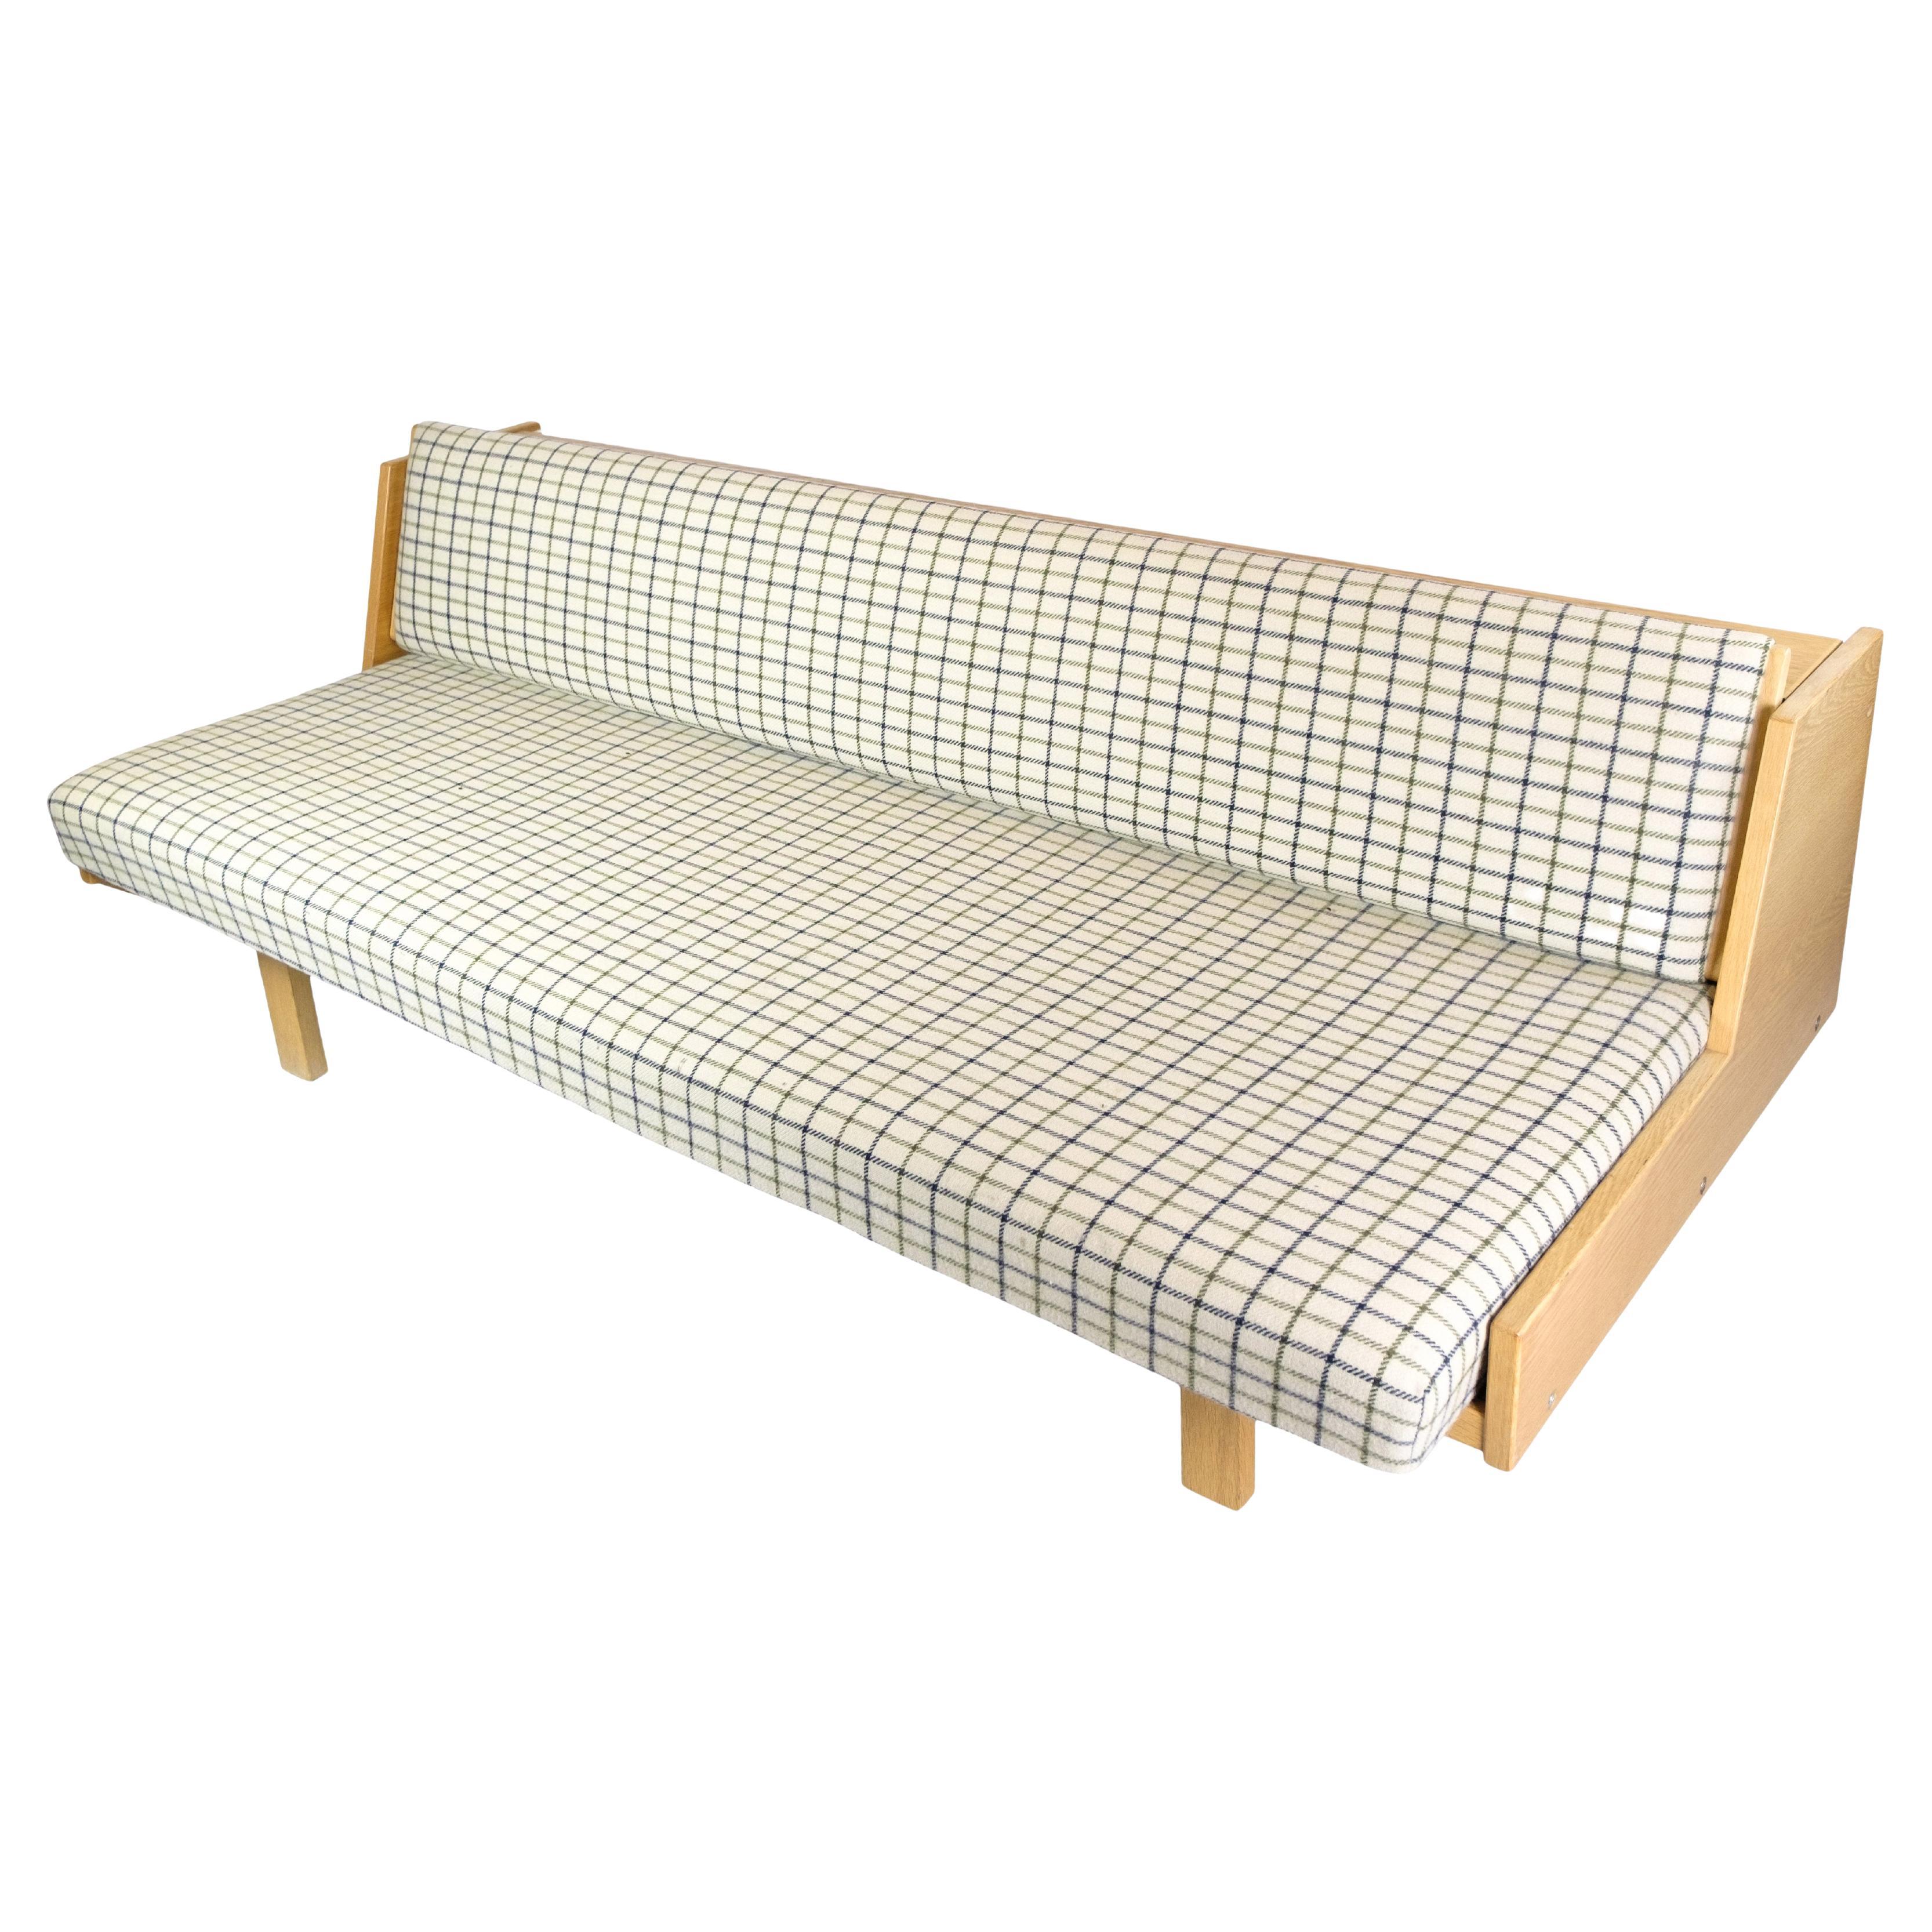 Daybed/Sofa Made In Oak Designed by Hans J. Wegner From 1960s For Sale